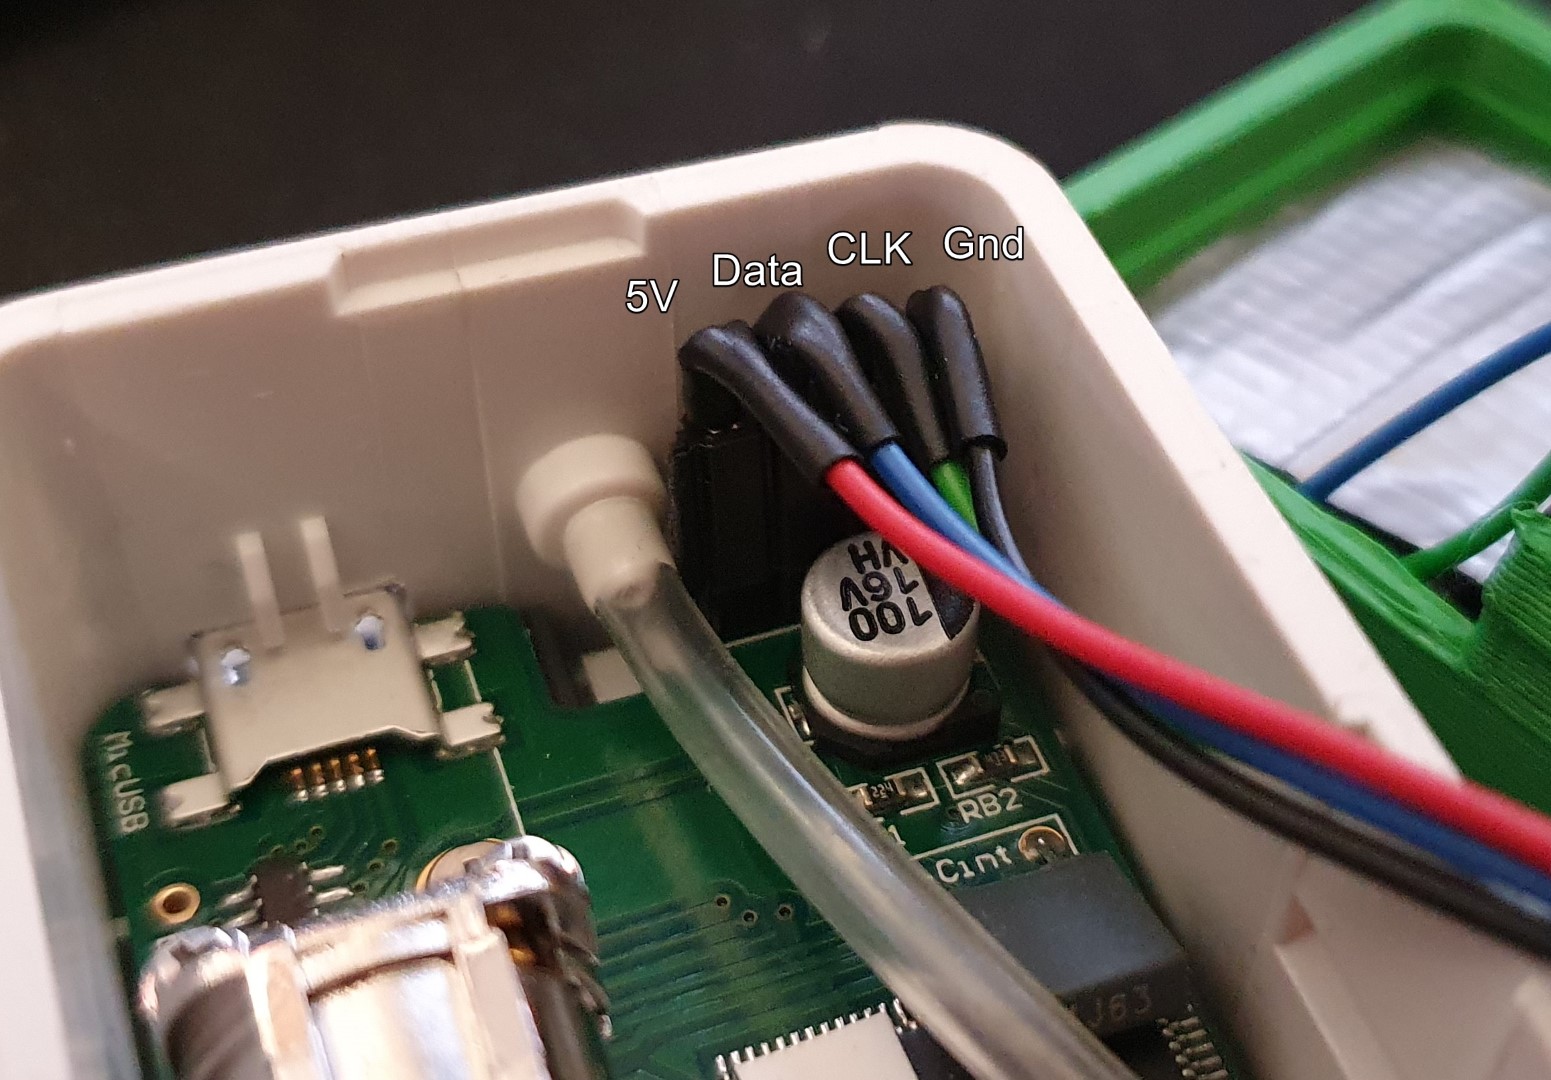 The pinout of the sensor&rsquo;s debug port, 5V - Data - CLK - Gnd